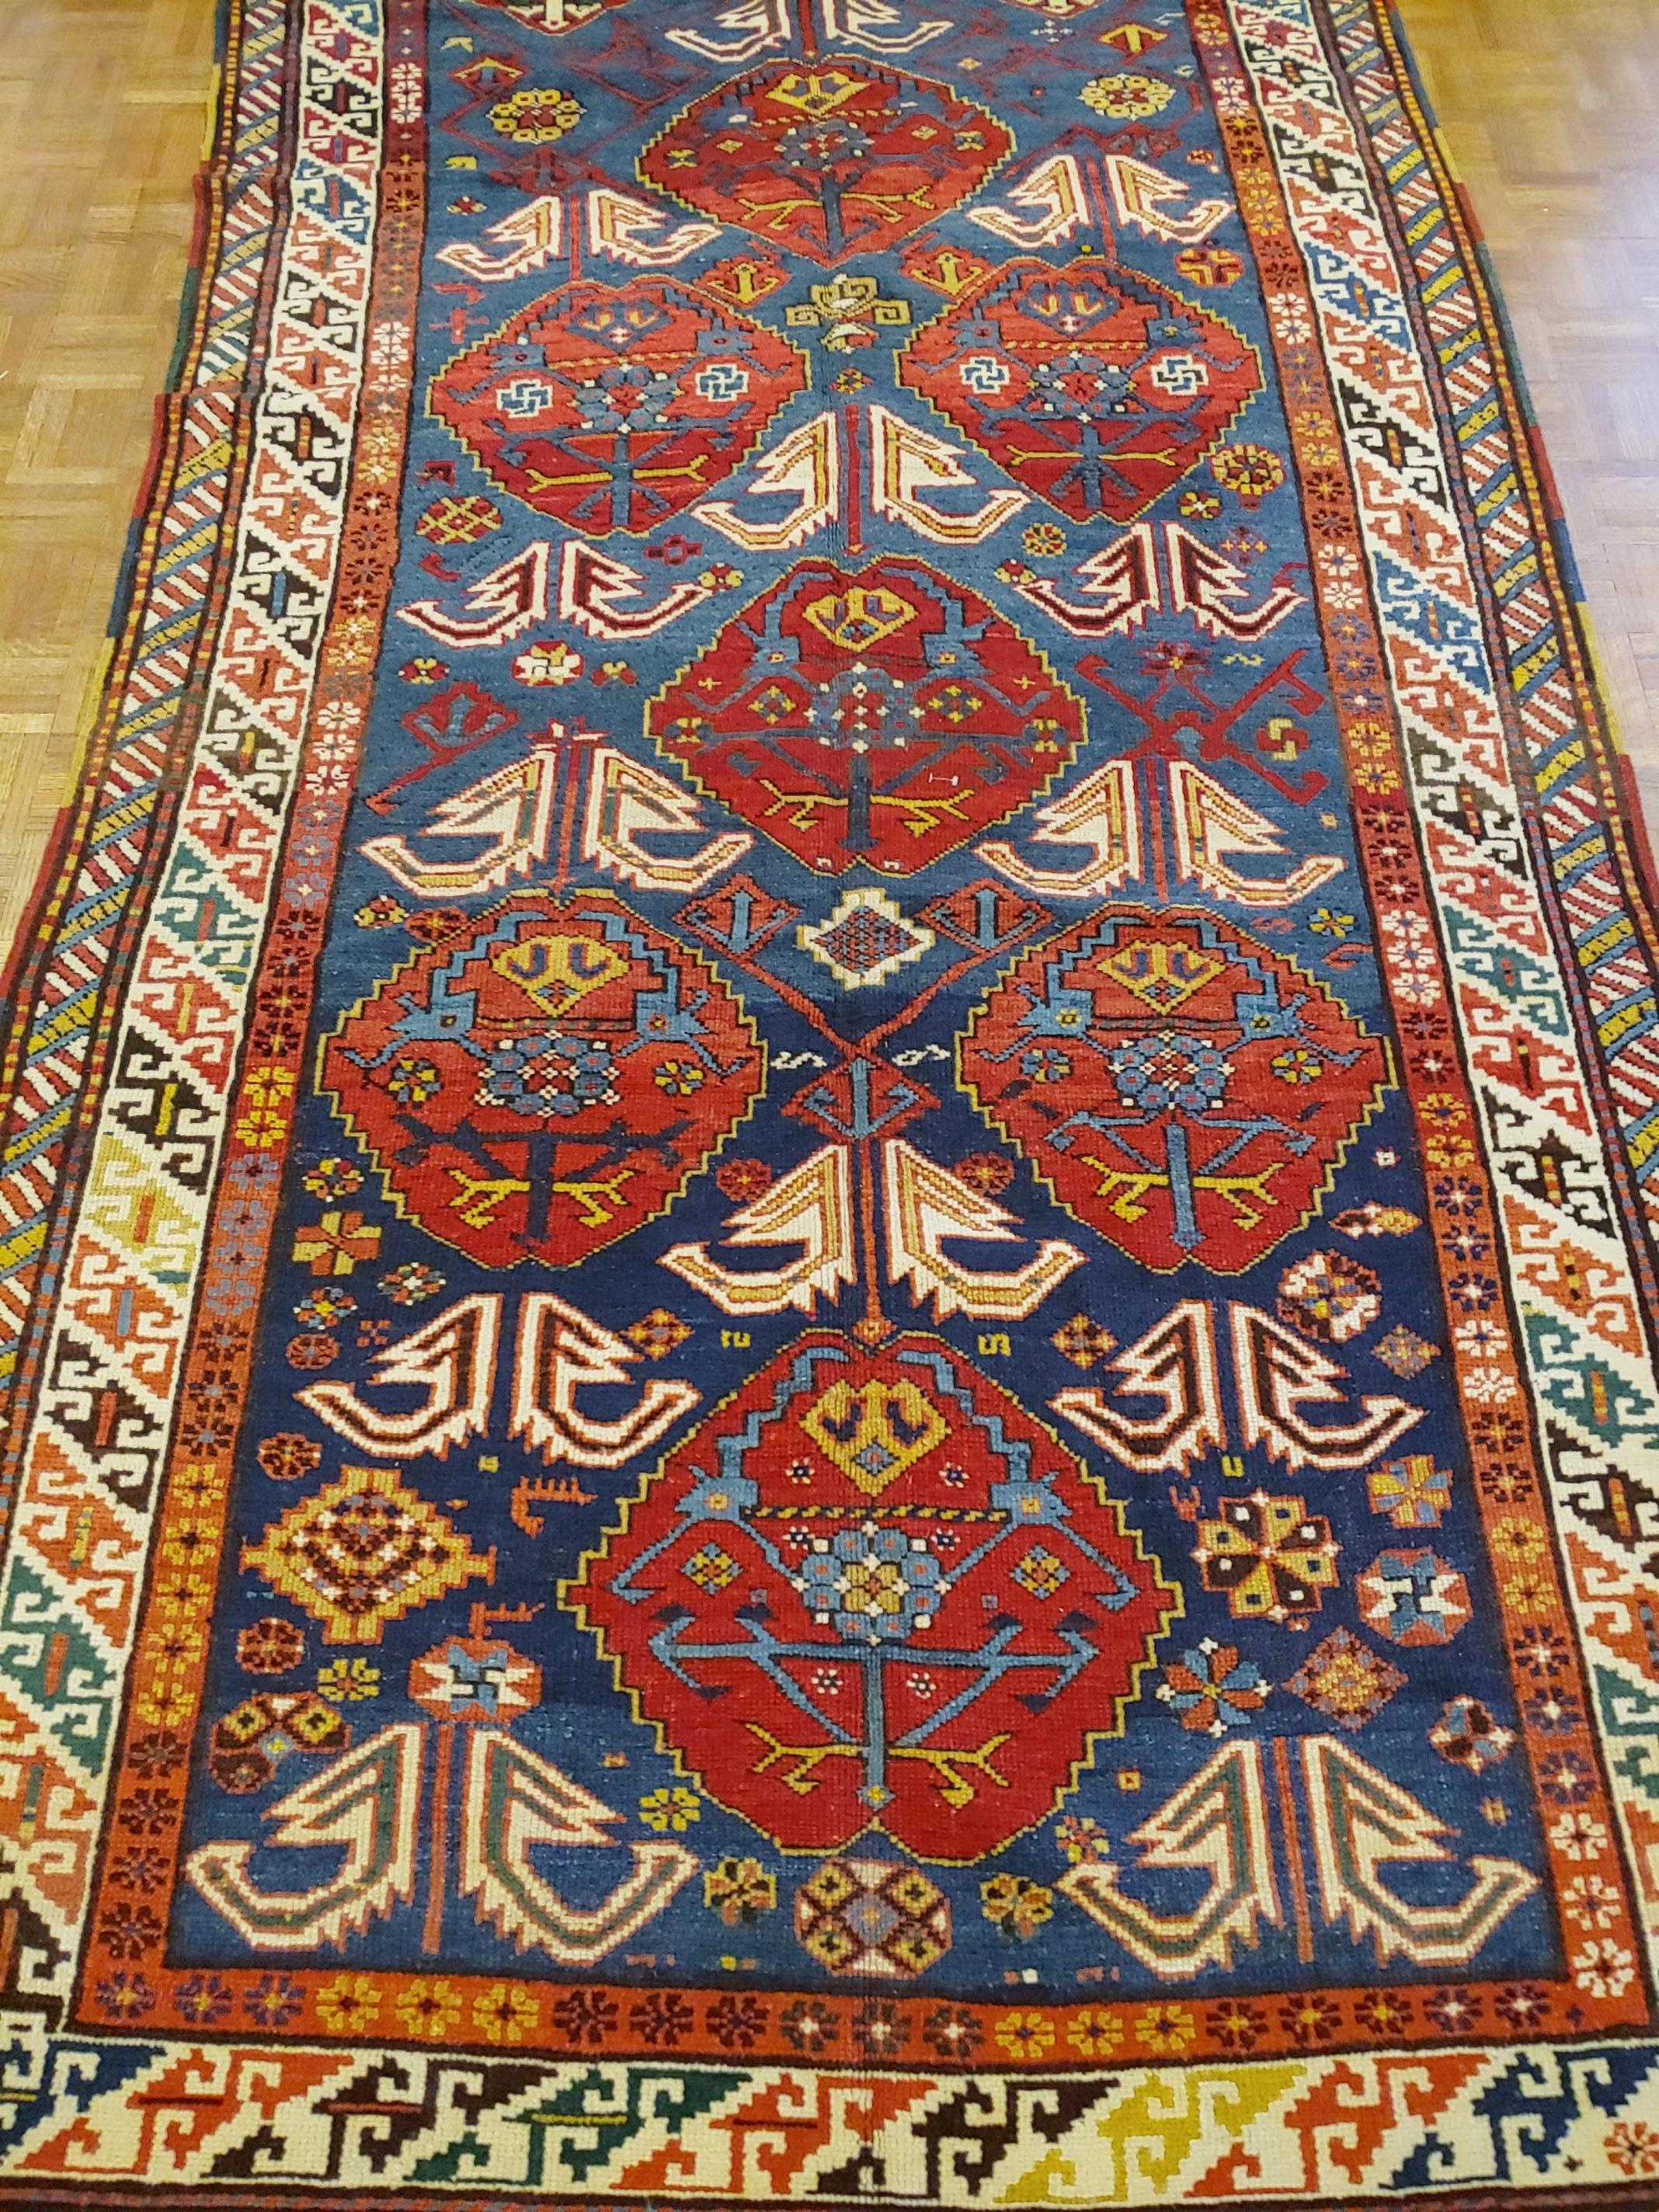 This is a unusual large Caucasian Kazak rug with the typical bold pattern on a royal blue field decorated with large stylized flower bouquets with lovely shades of ivory and red. It is circa 1910 and is a large scatter size of 5 x 9-3.